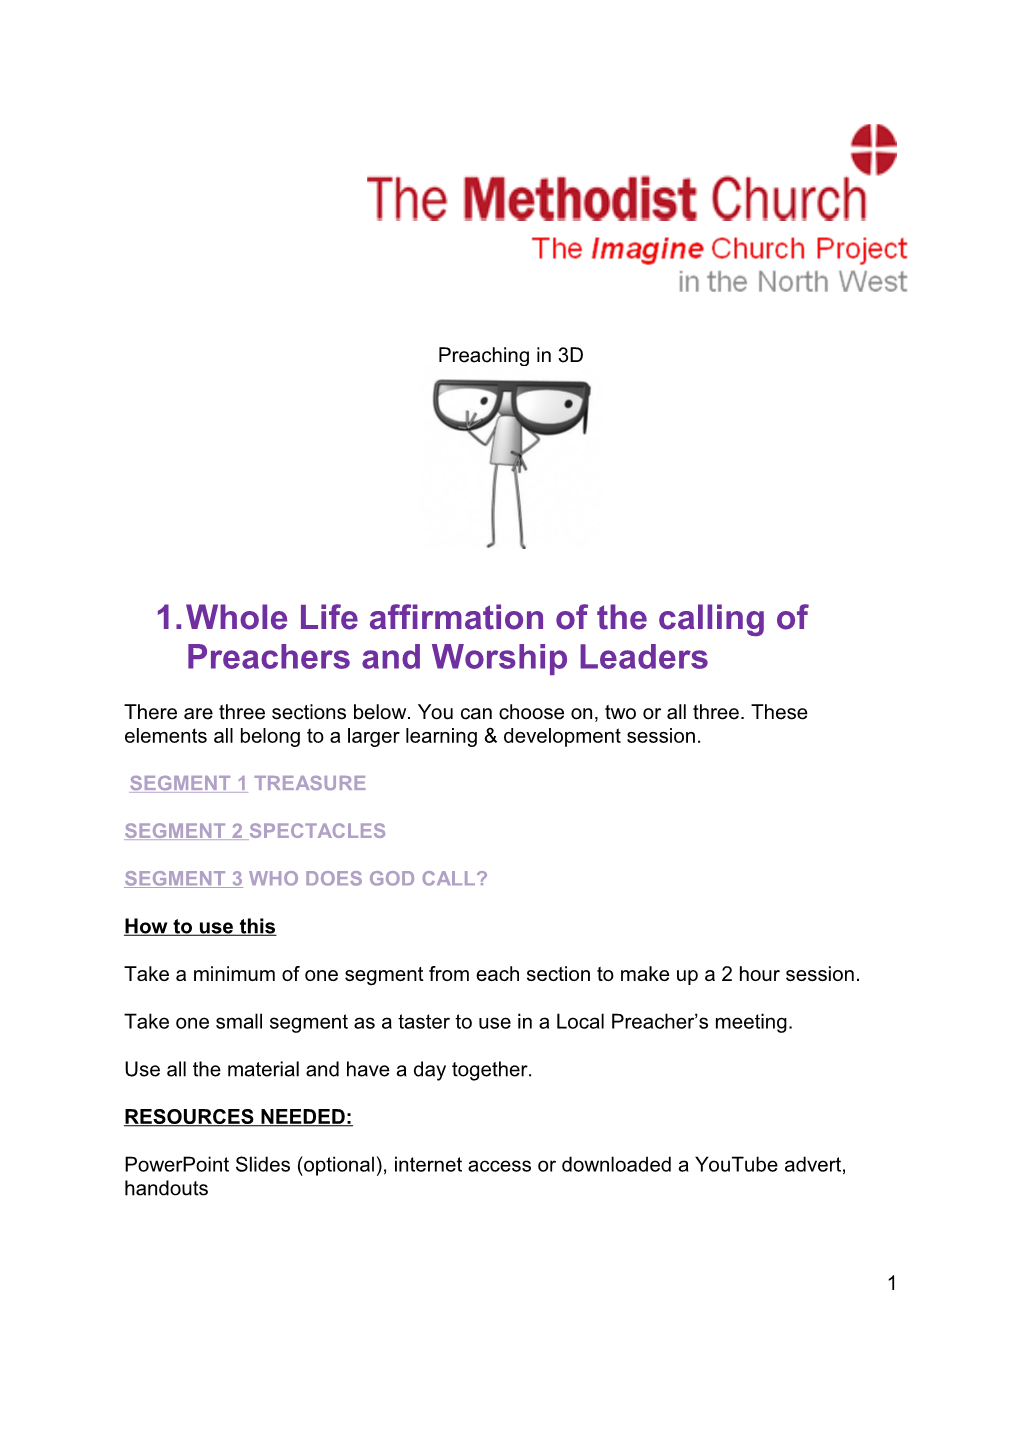 1. Whole Life Affirmation of the Calling of Preachers and Worship Leaders